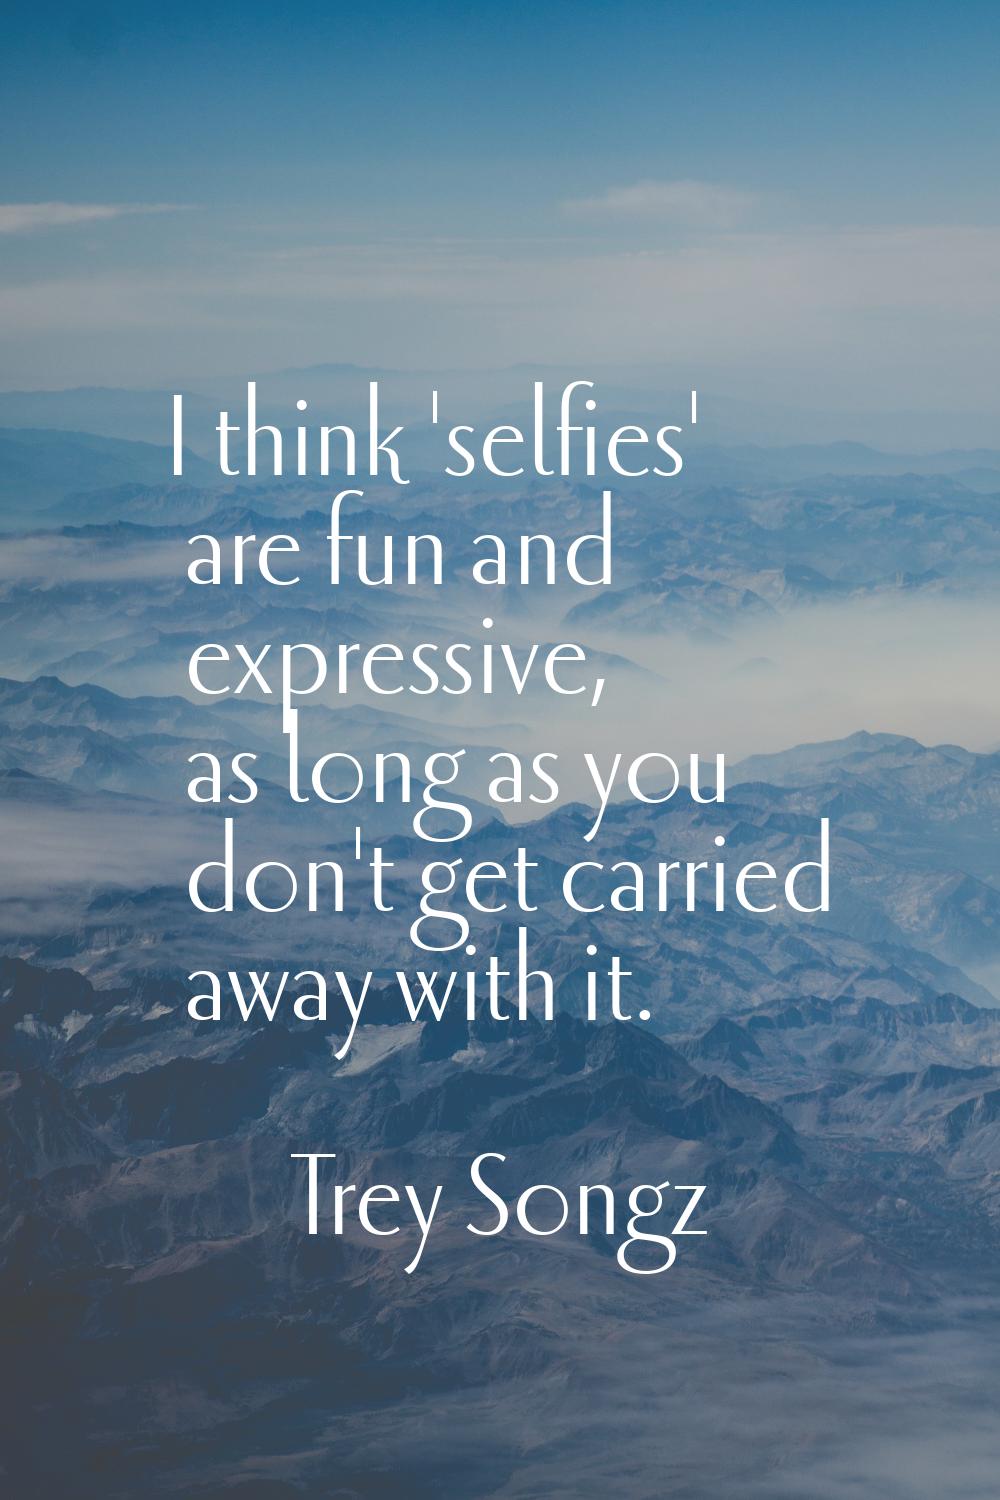 I think 'selfies' are fun and expressive, as long as you don't get carried away with it.